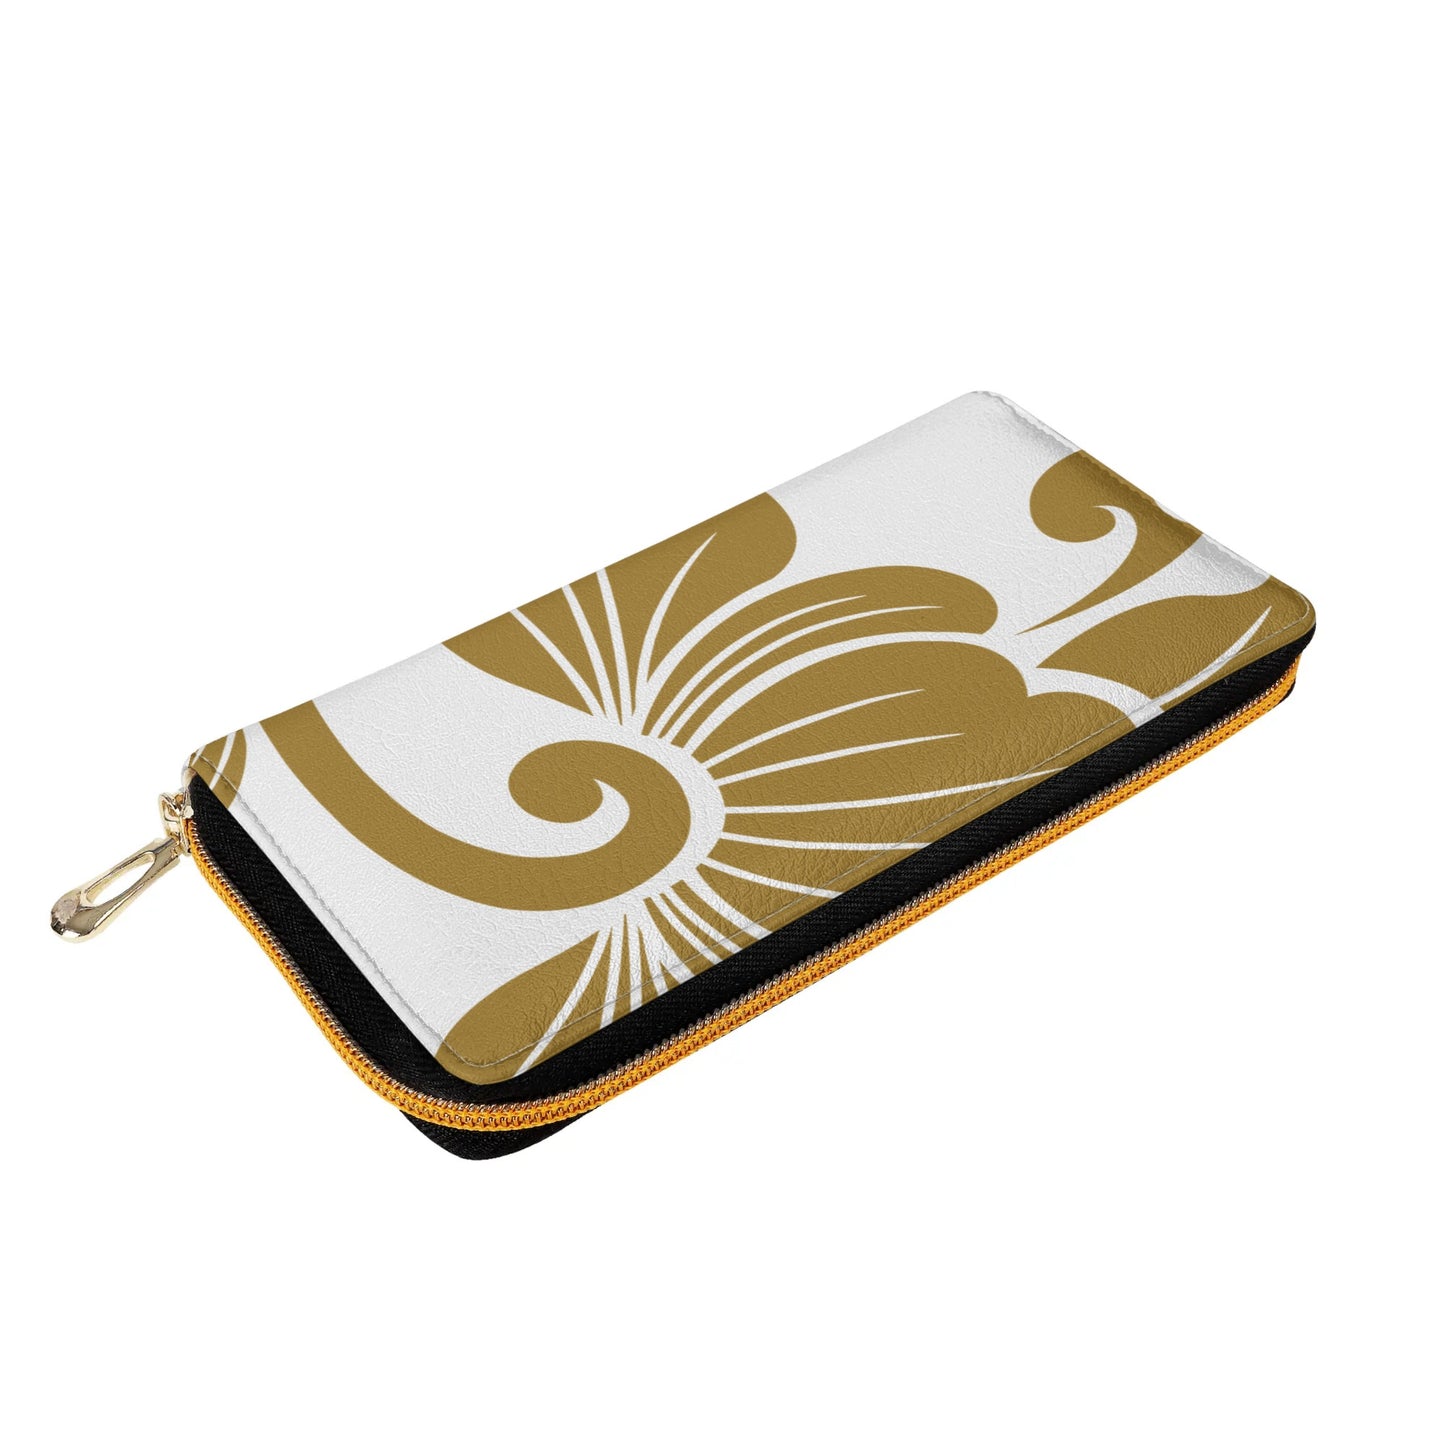 DuGamii Gold Rose Printed PU Leather Zipper Wallet